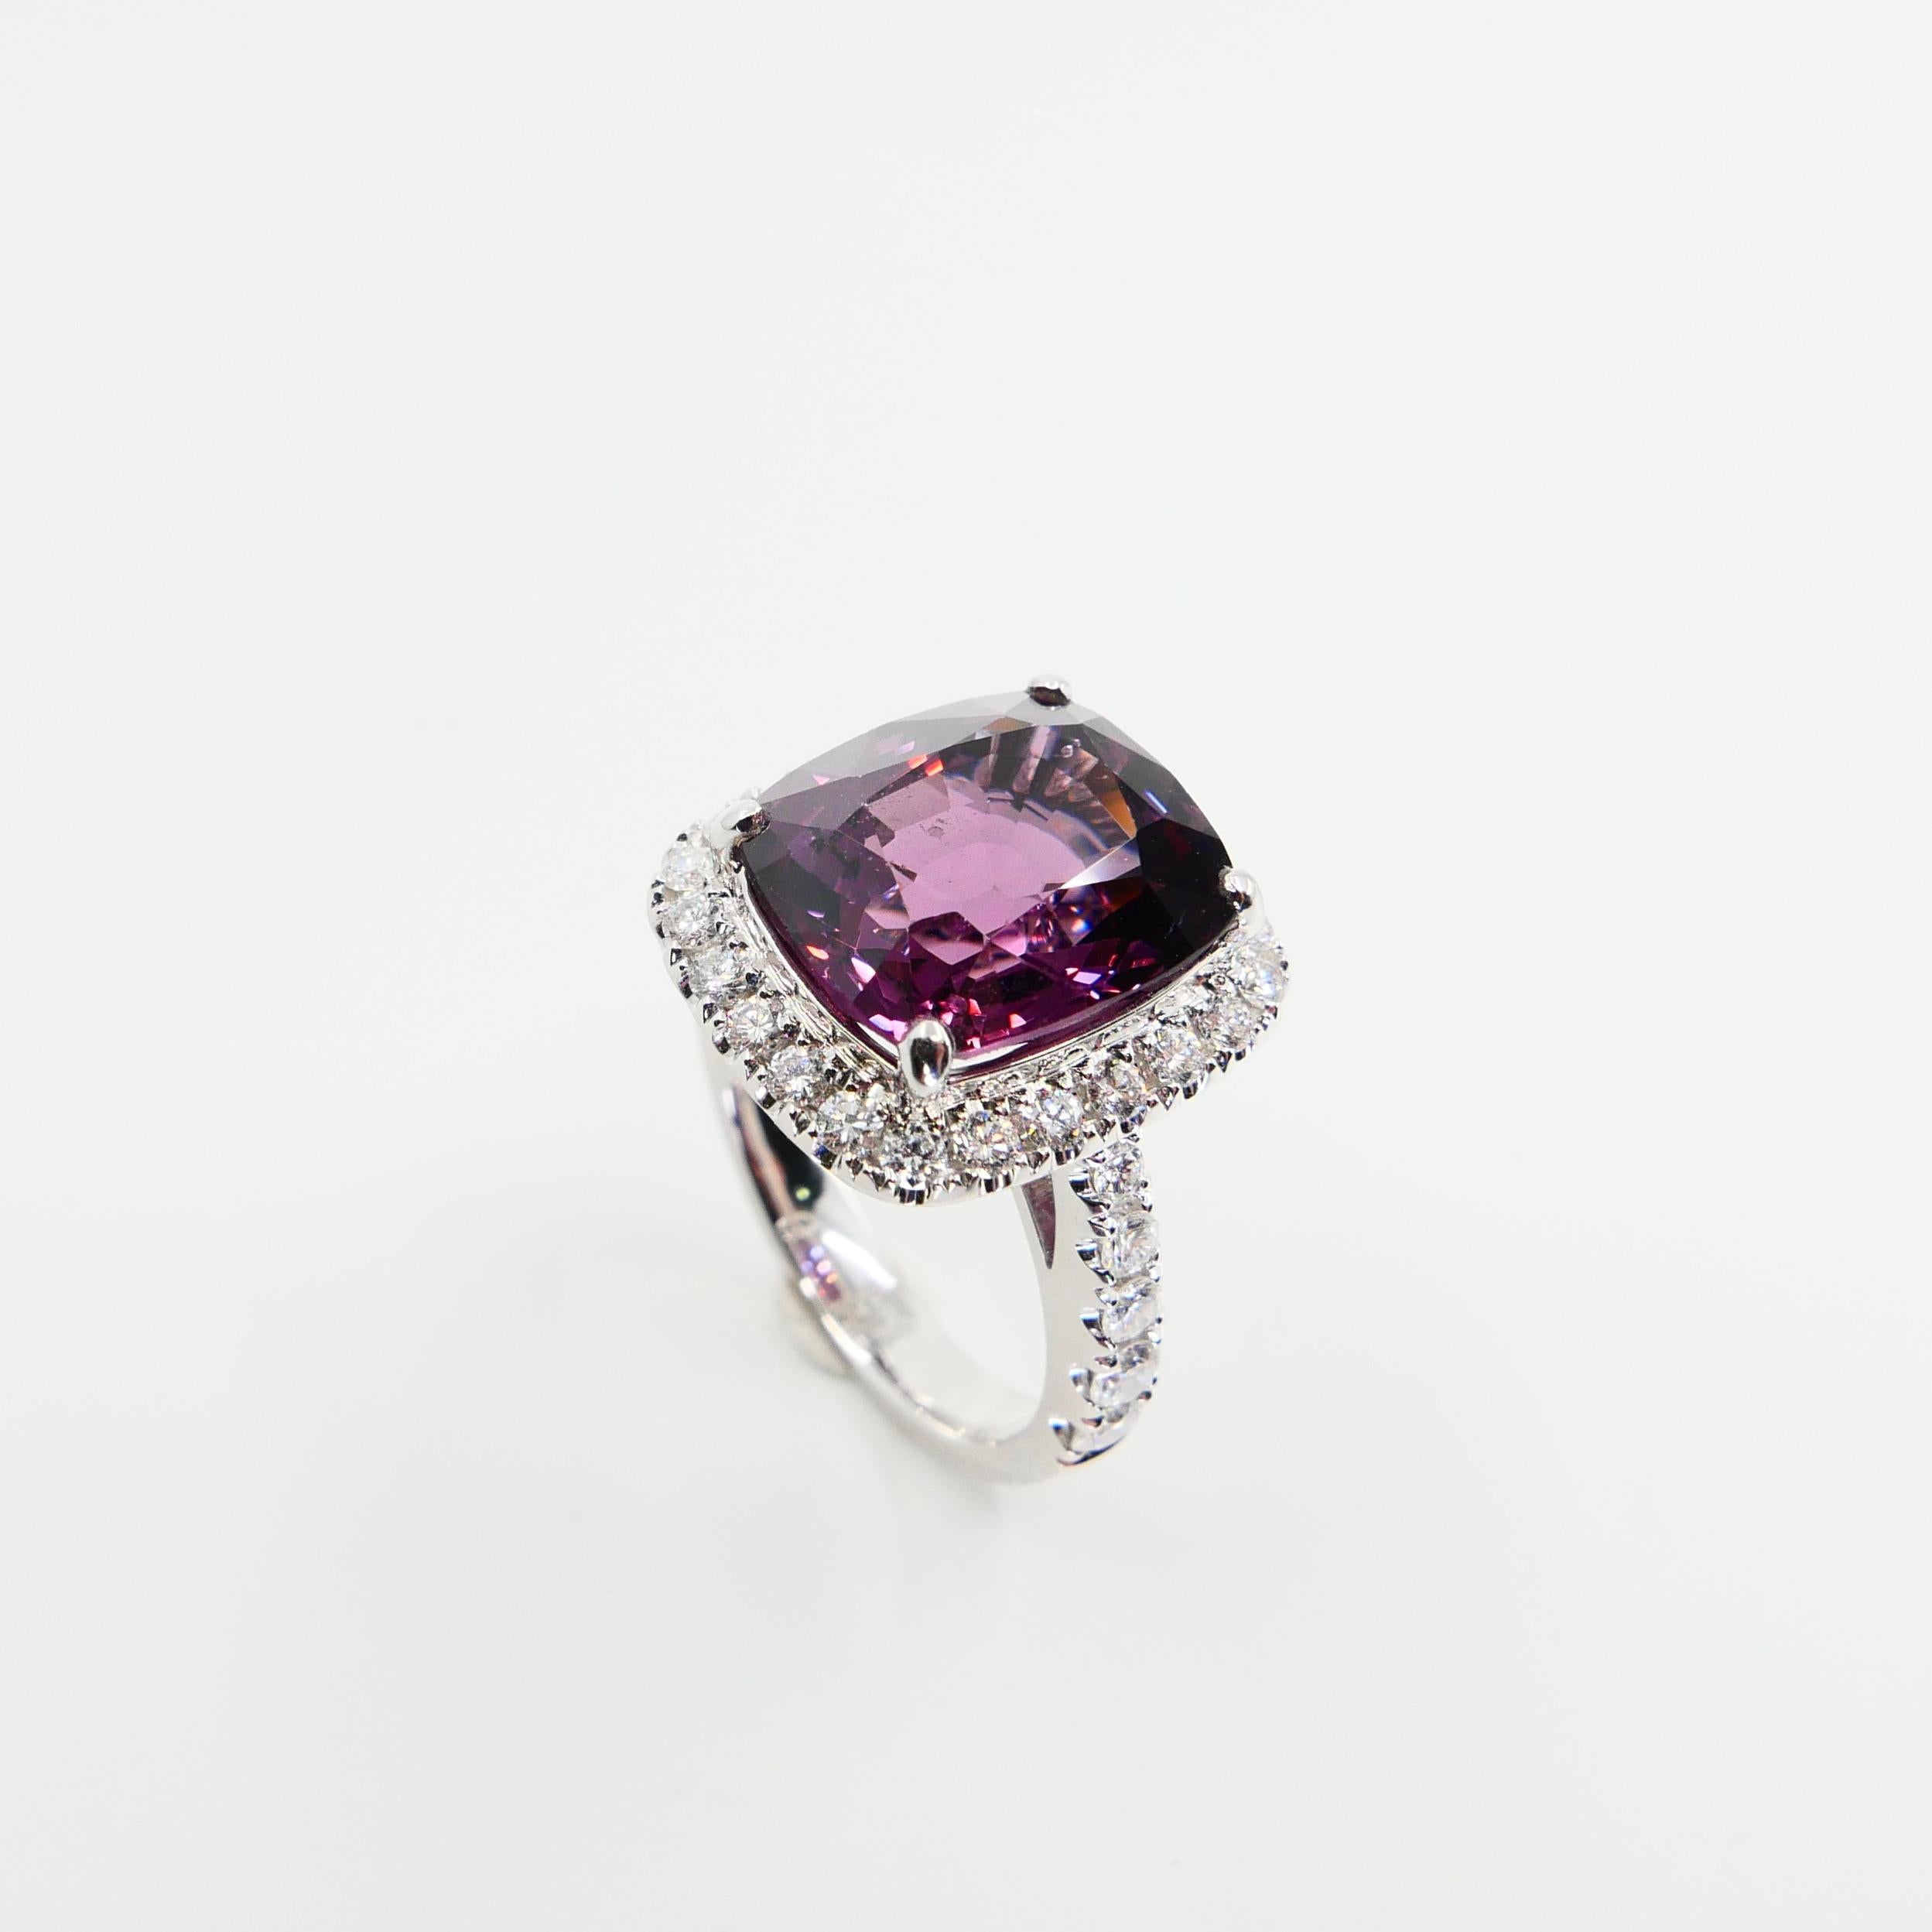 Certified Natural 9.18 Carat Vivid Purple No Heat Spinel & Diamond Cocktail Ring For Sale 7